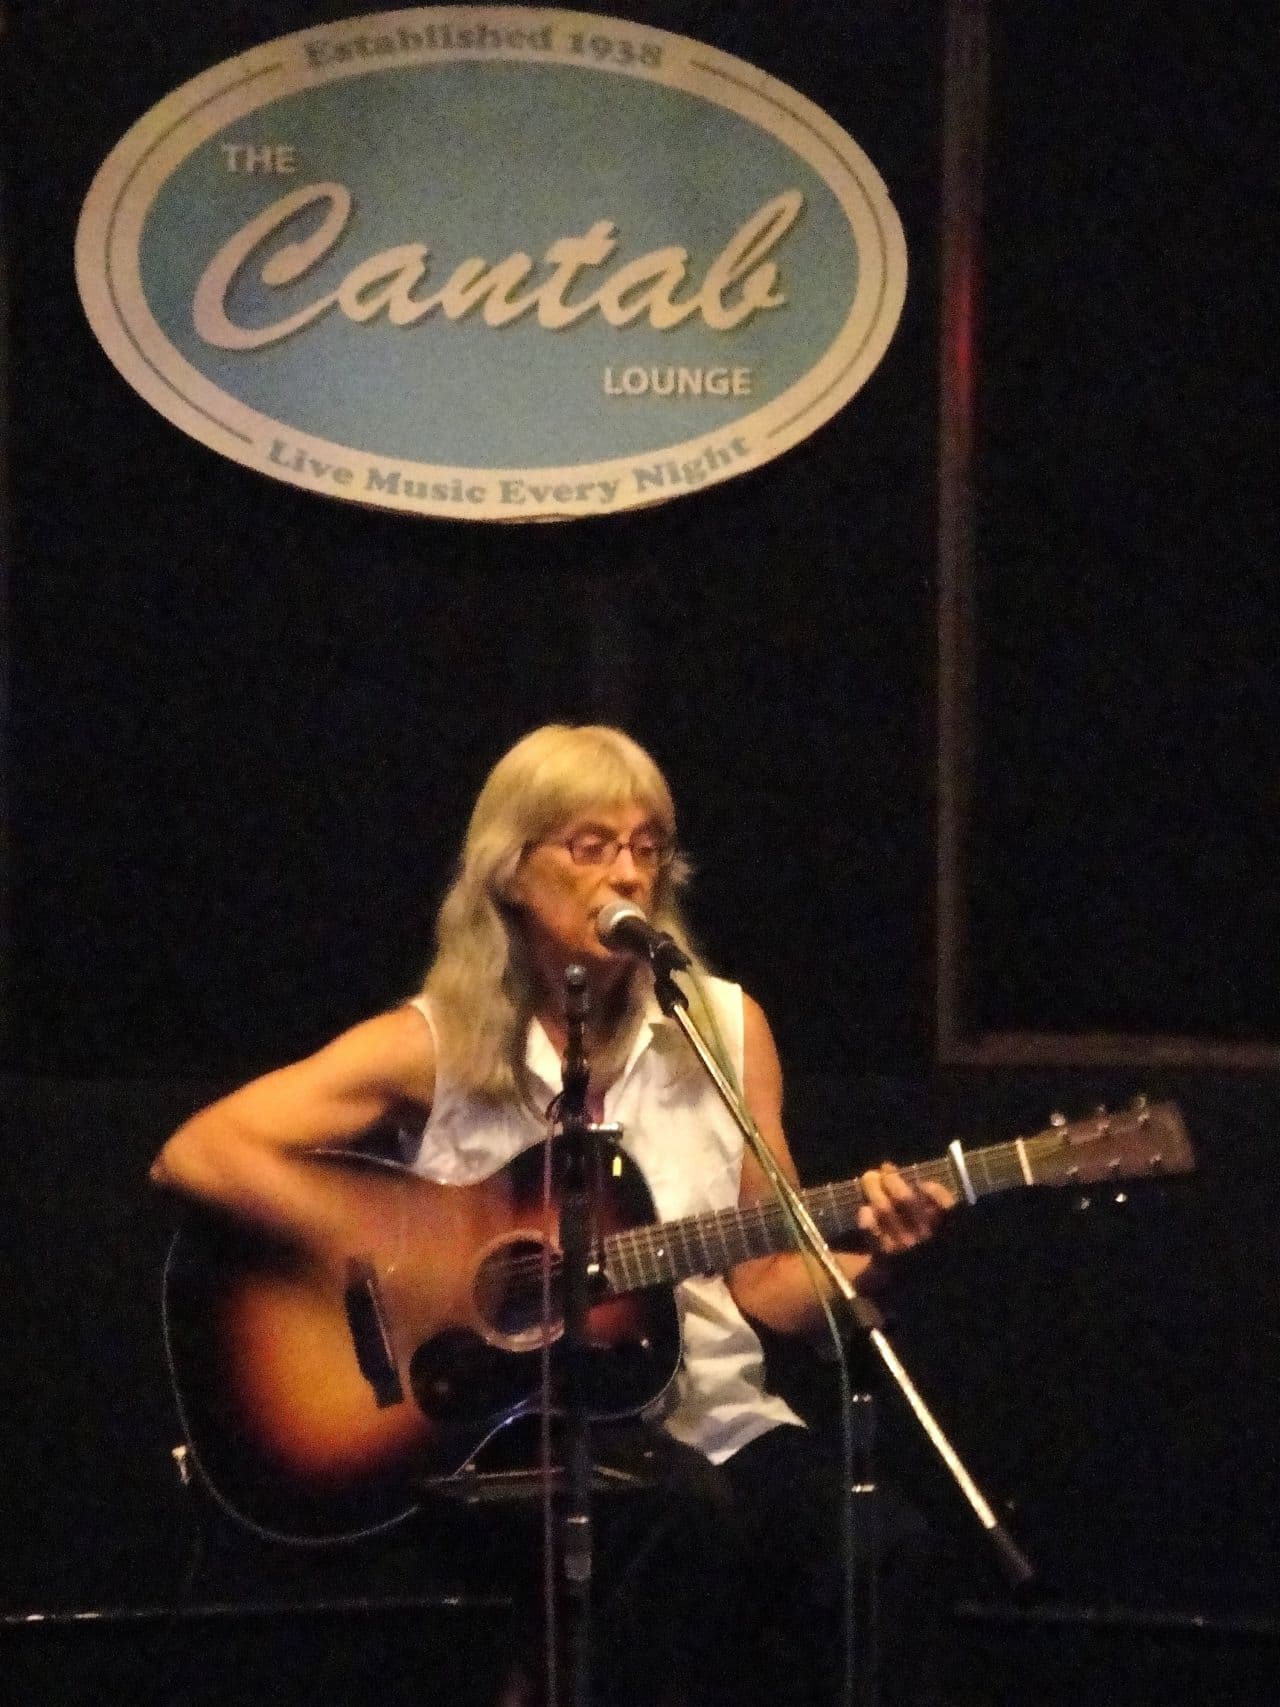 Marcia Deihl, in an undated photo, performing at the Cantab Lounge in Cambridge, Mass. (Marcia Deihl/Courtesy)